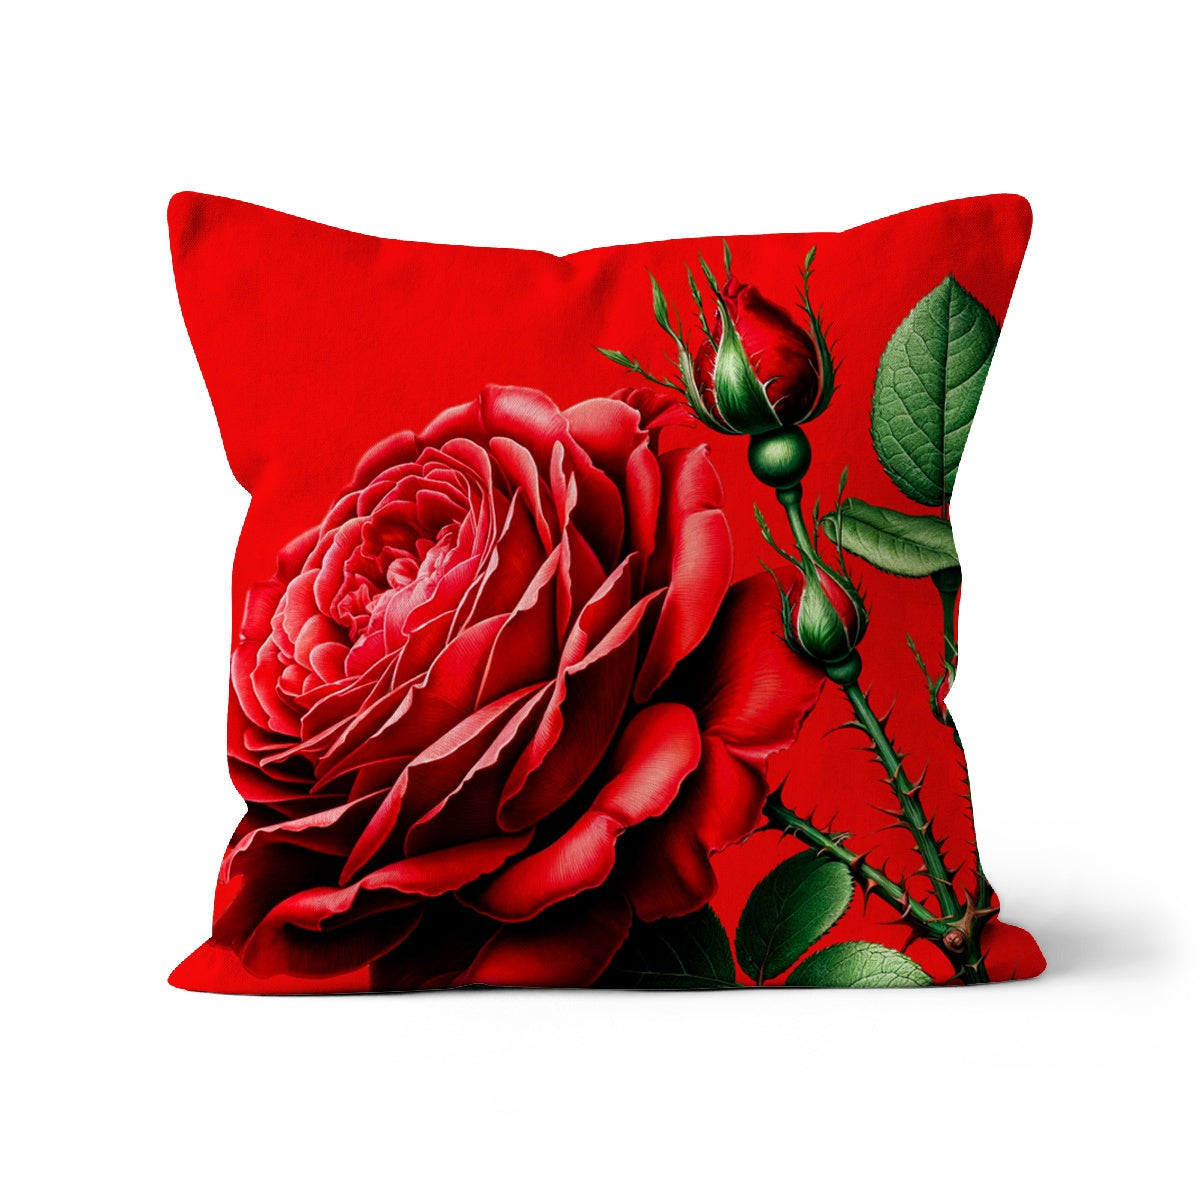 Red Rose Flower Cushion